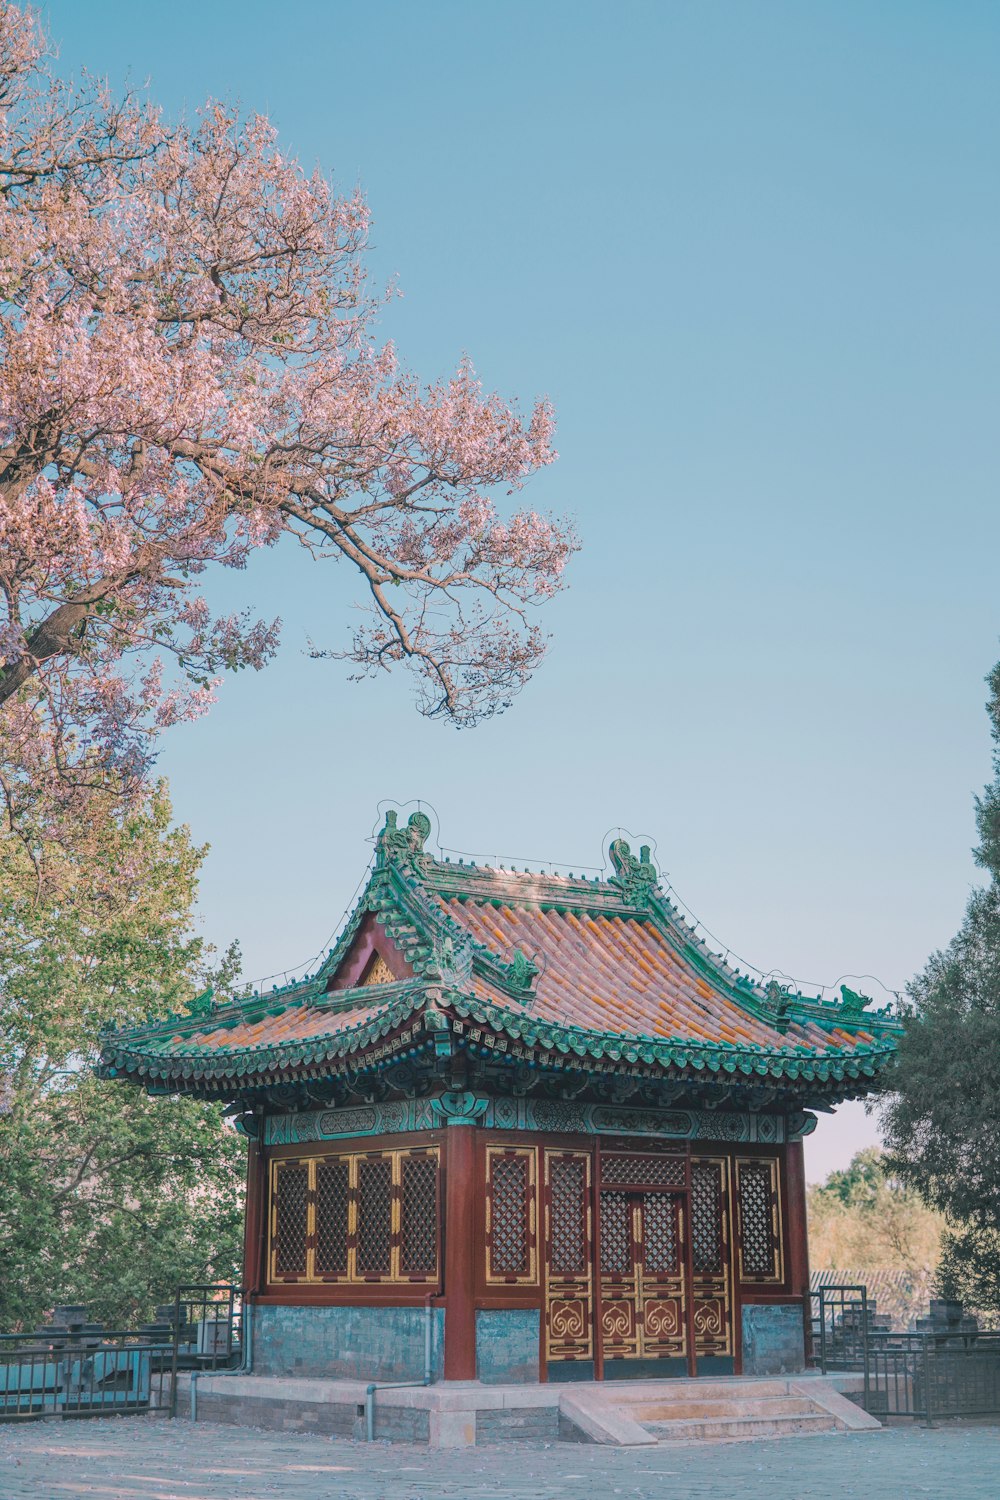 brown and red wooden temple